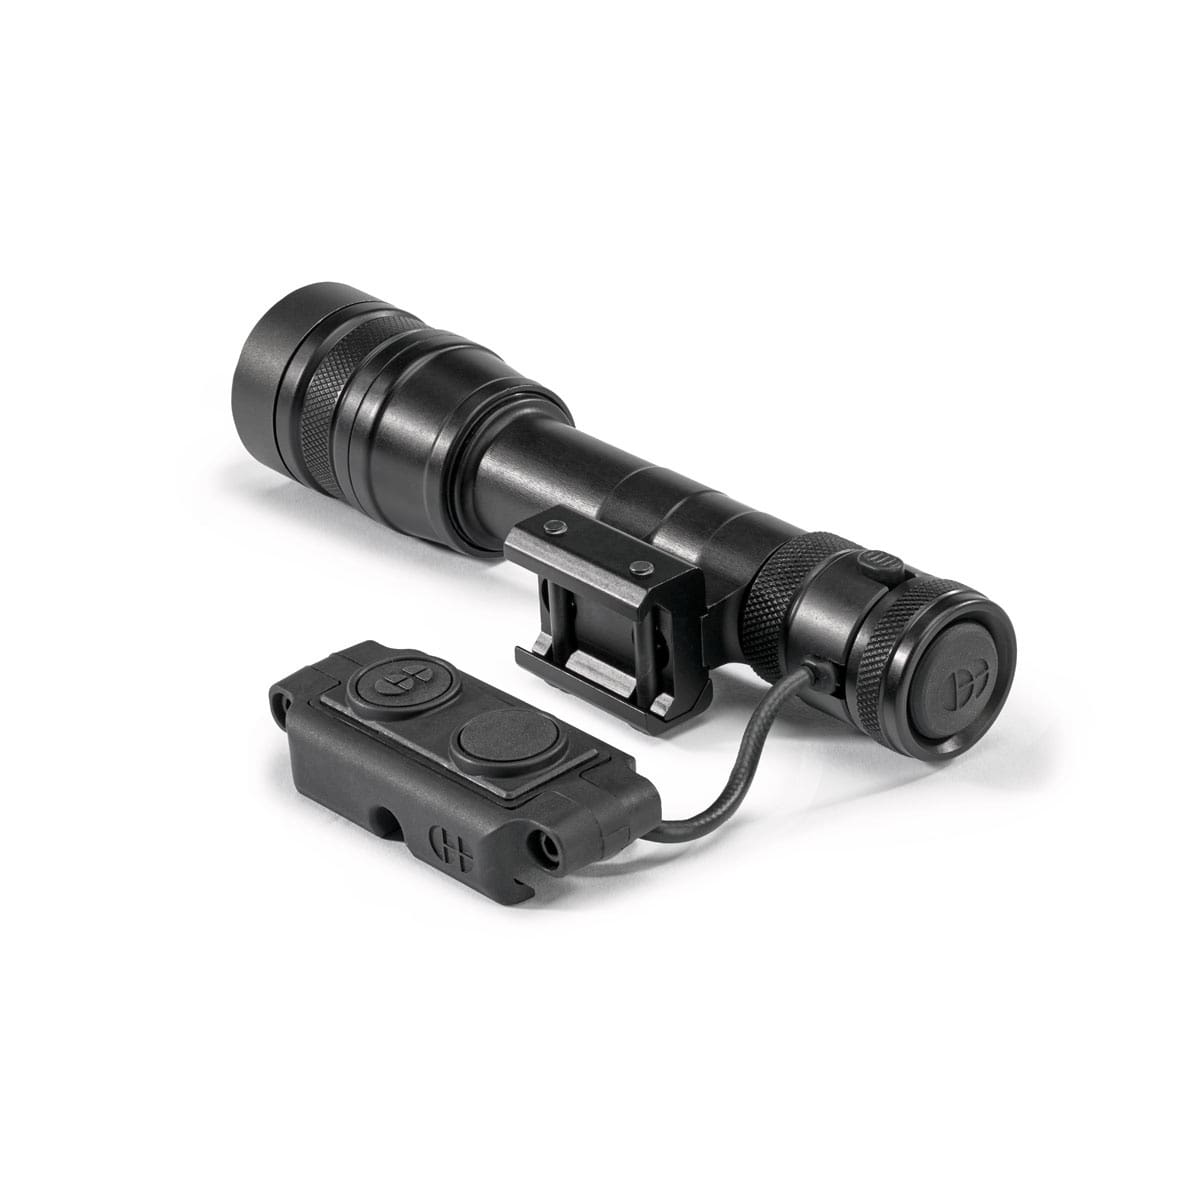 Cloud Defensive Unveils New REIN, a 60,000 Candela and 1,400 Lumen 